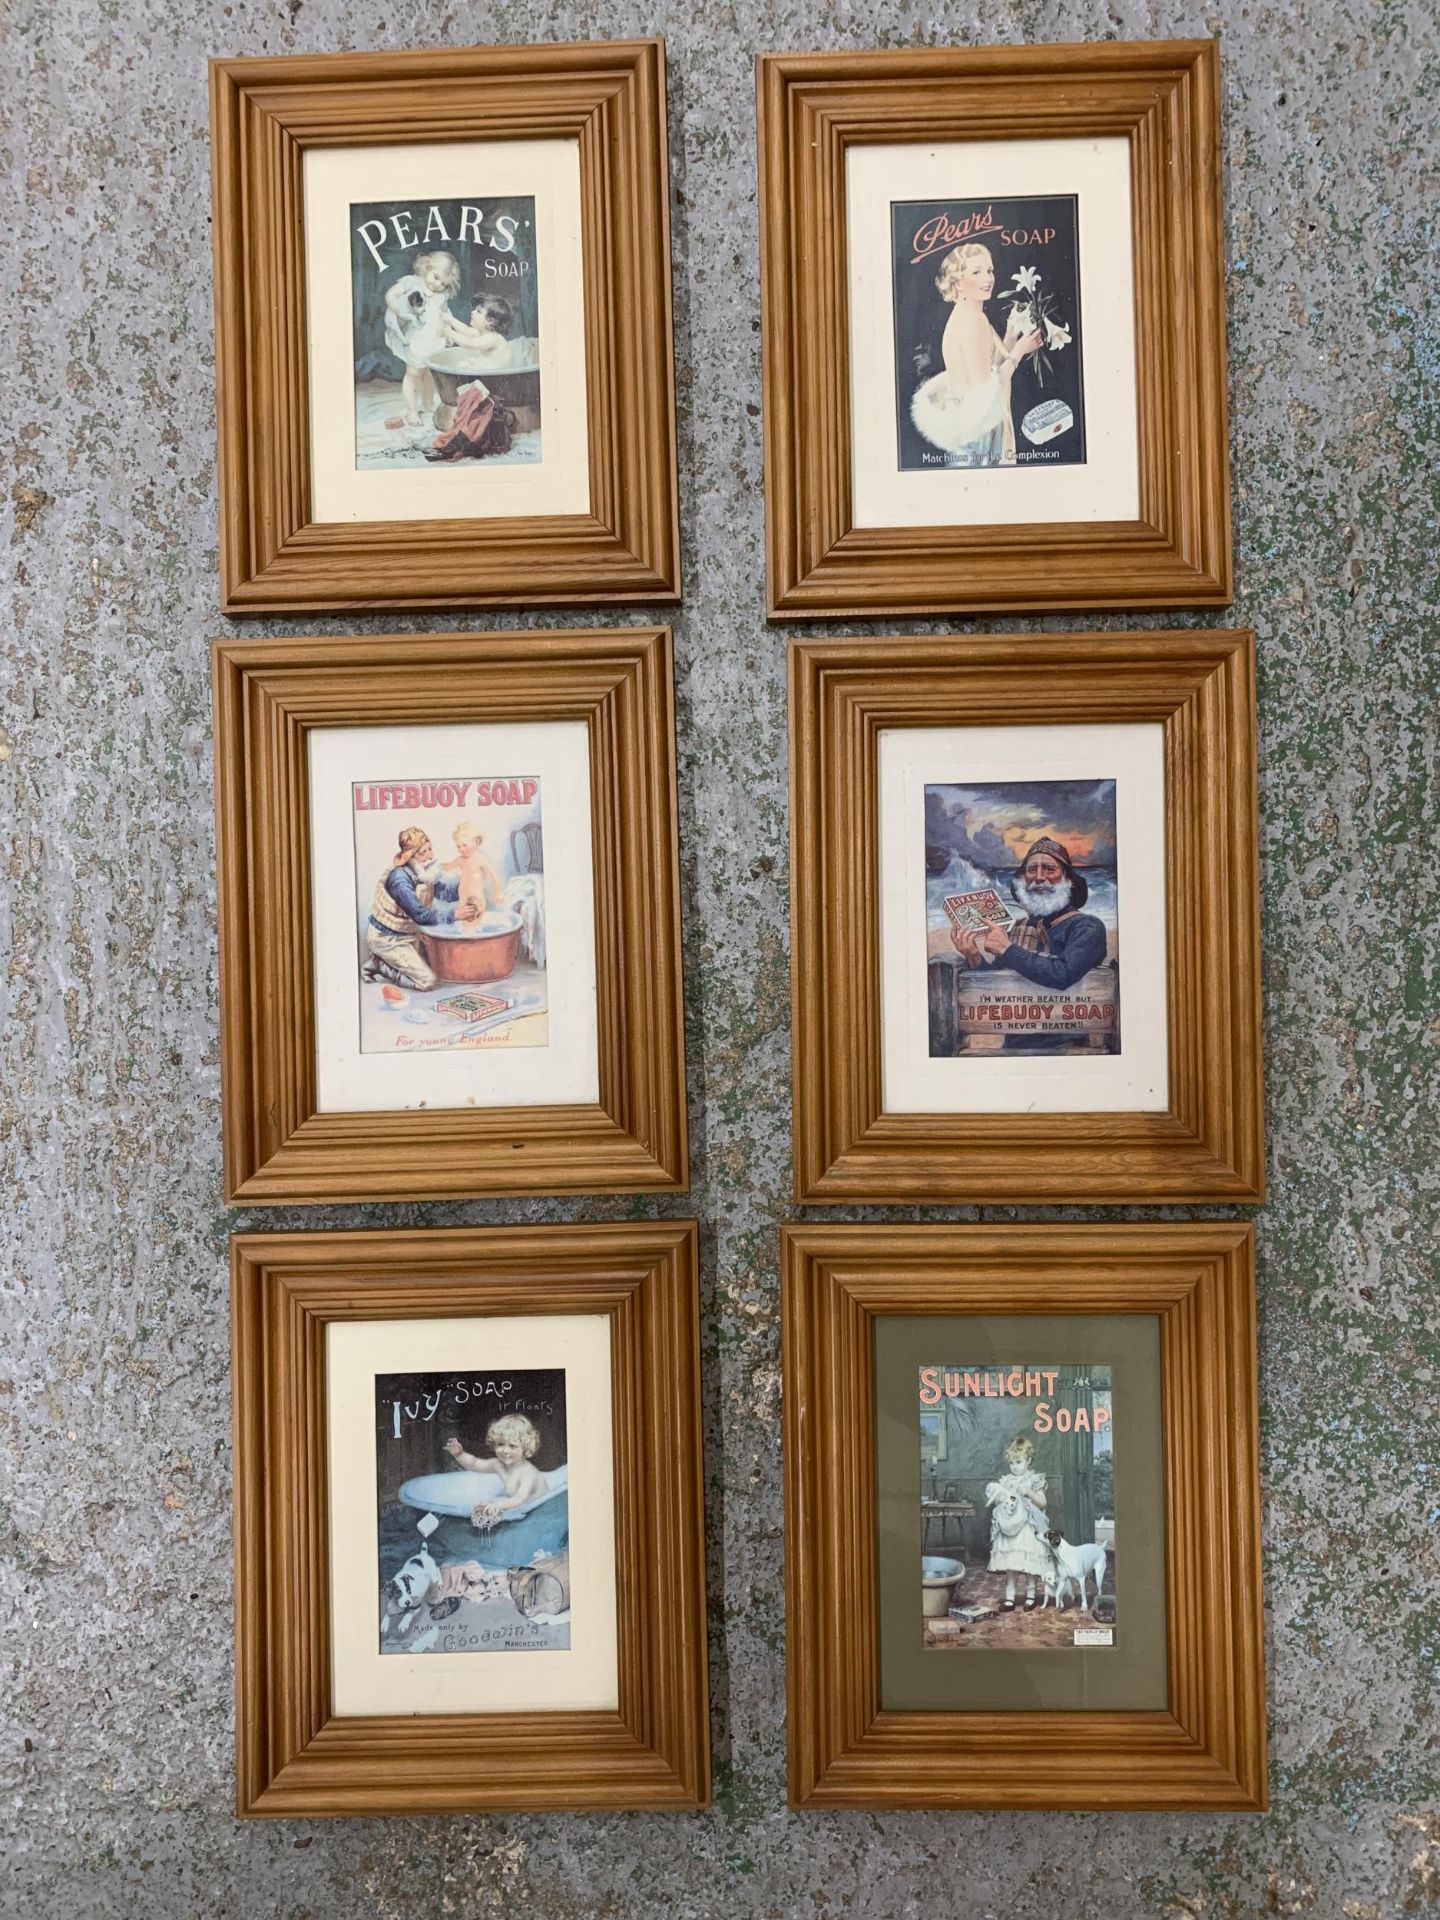 SIX FRAMED VINTAGE ADVERTISING SOAP PICTURES TO INCLUDE LIFEBUDY SOAP, IVY SOAP, SUNLIGTH SOAP AND